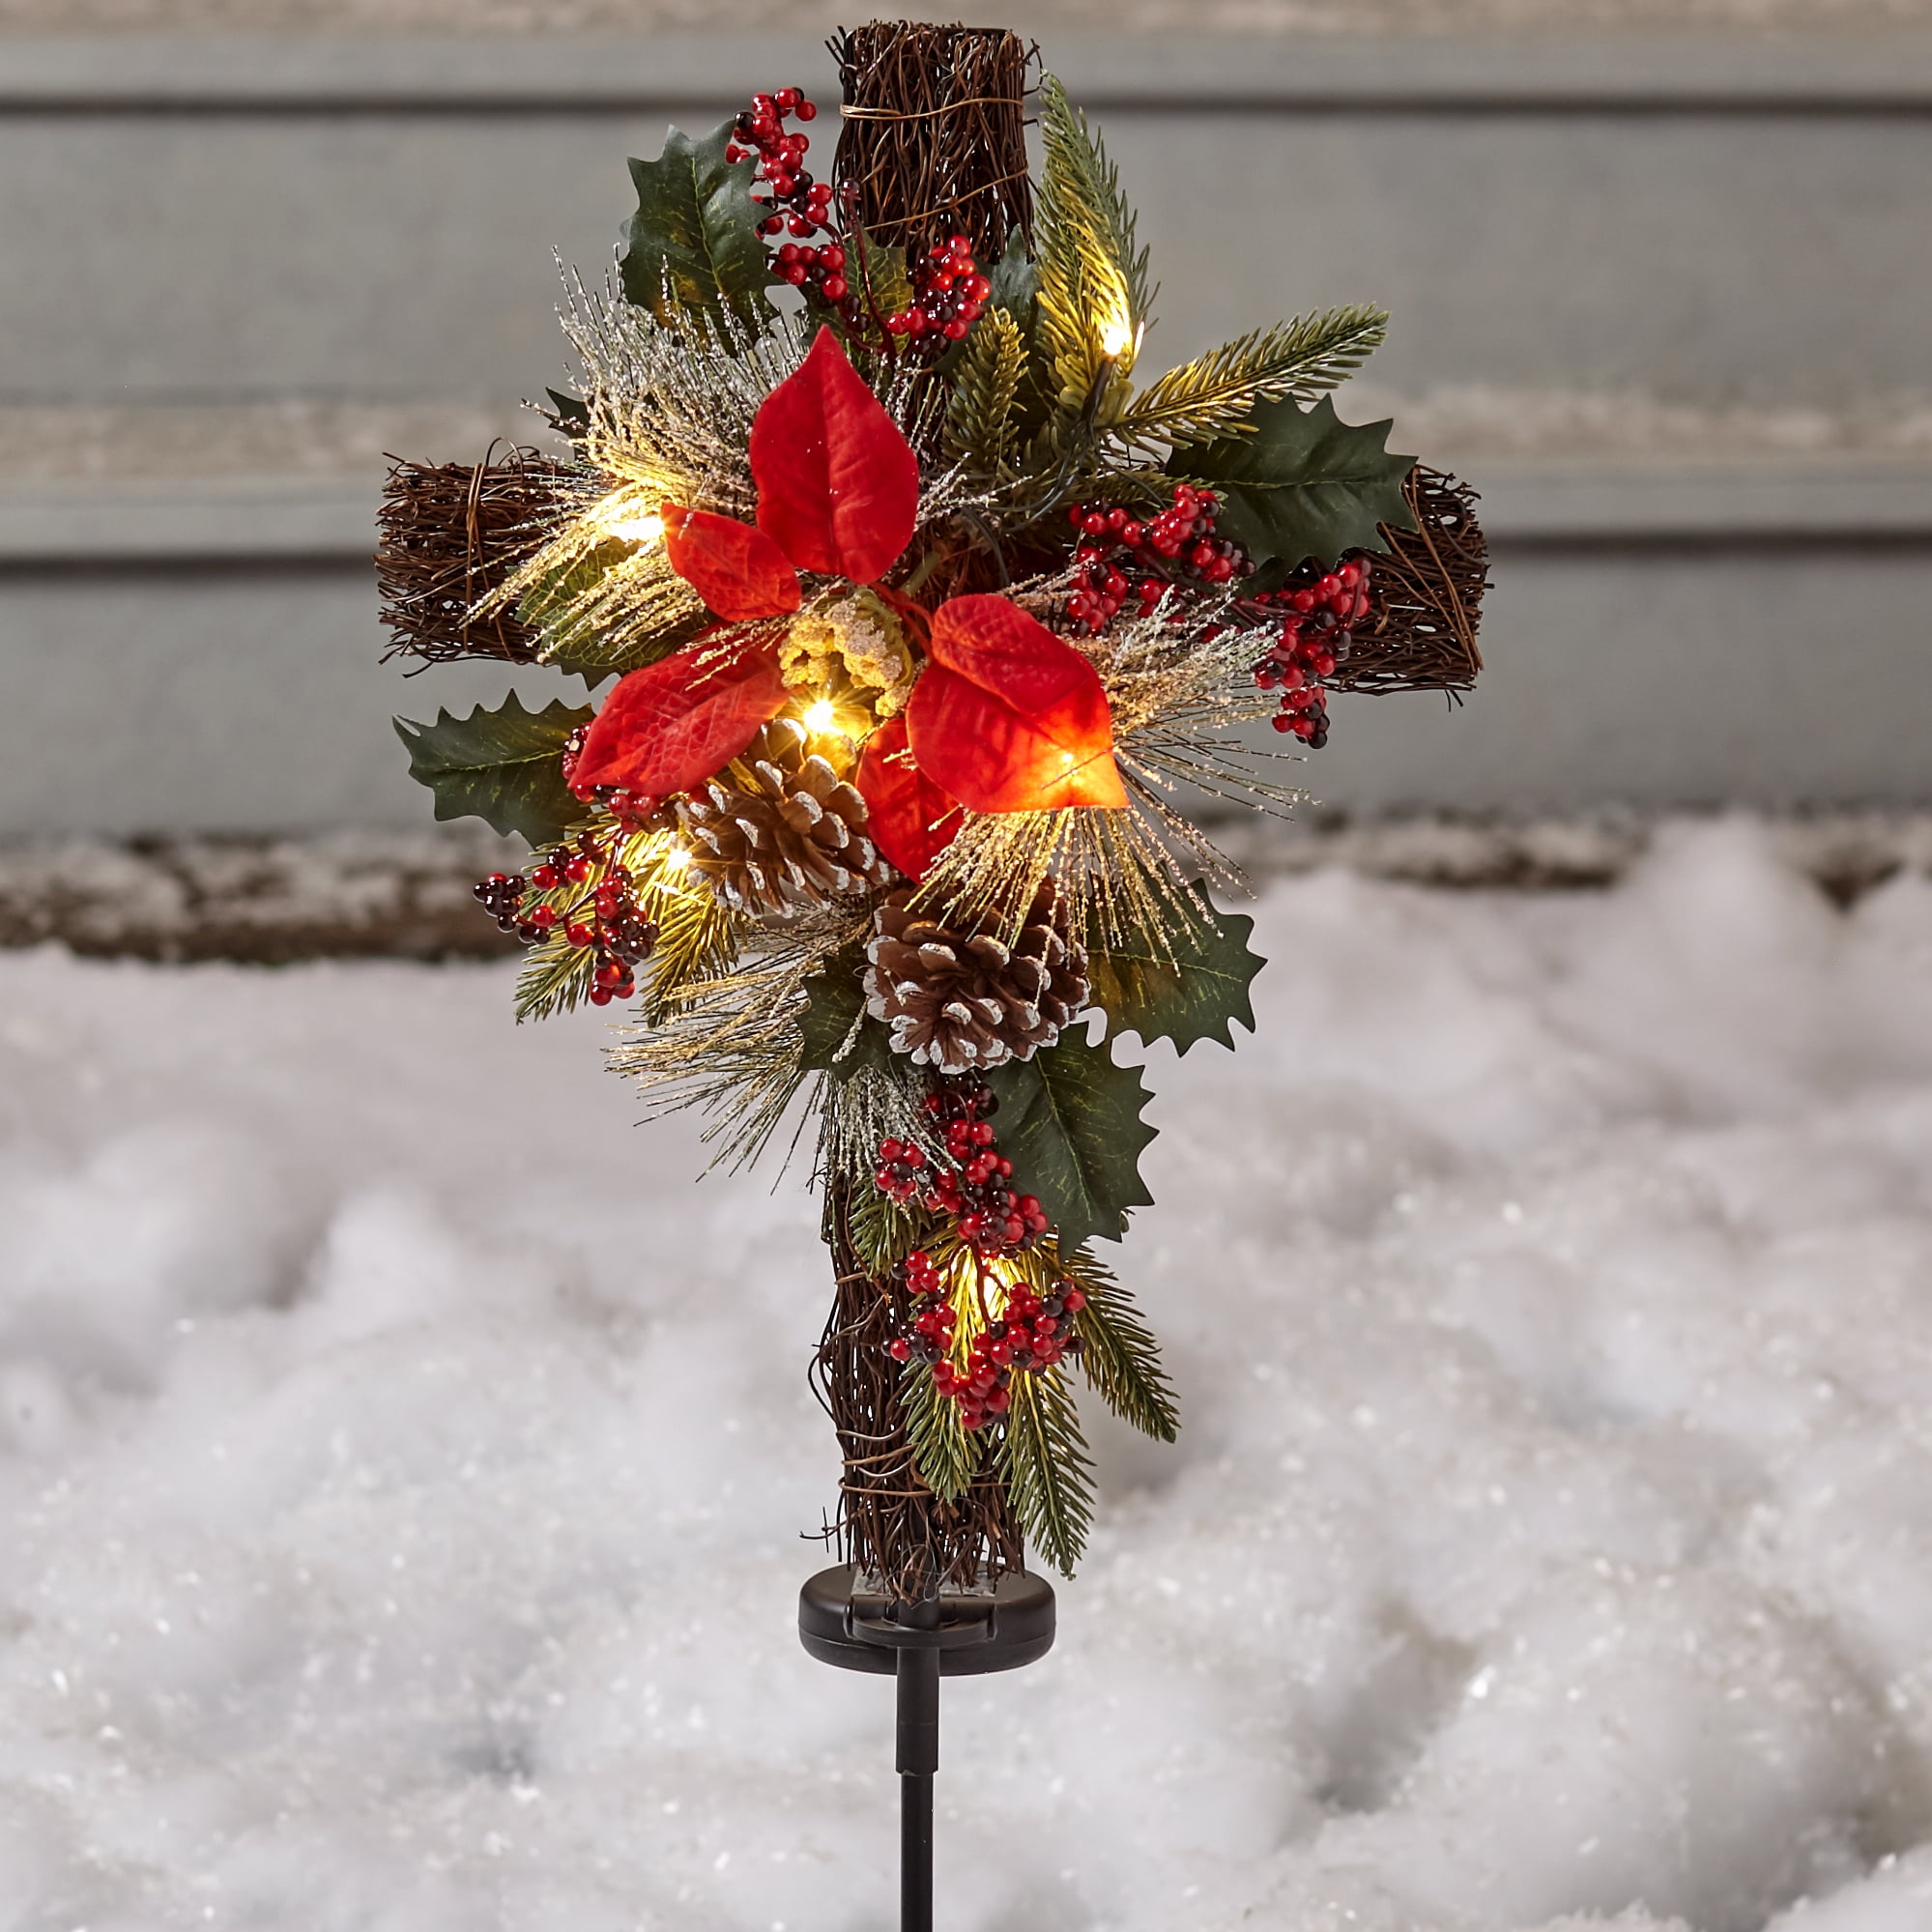 The Lakeside Collection Solar Lighted Cross with Faux Spring Flowers Stake Cemetery Memorial